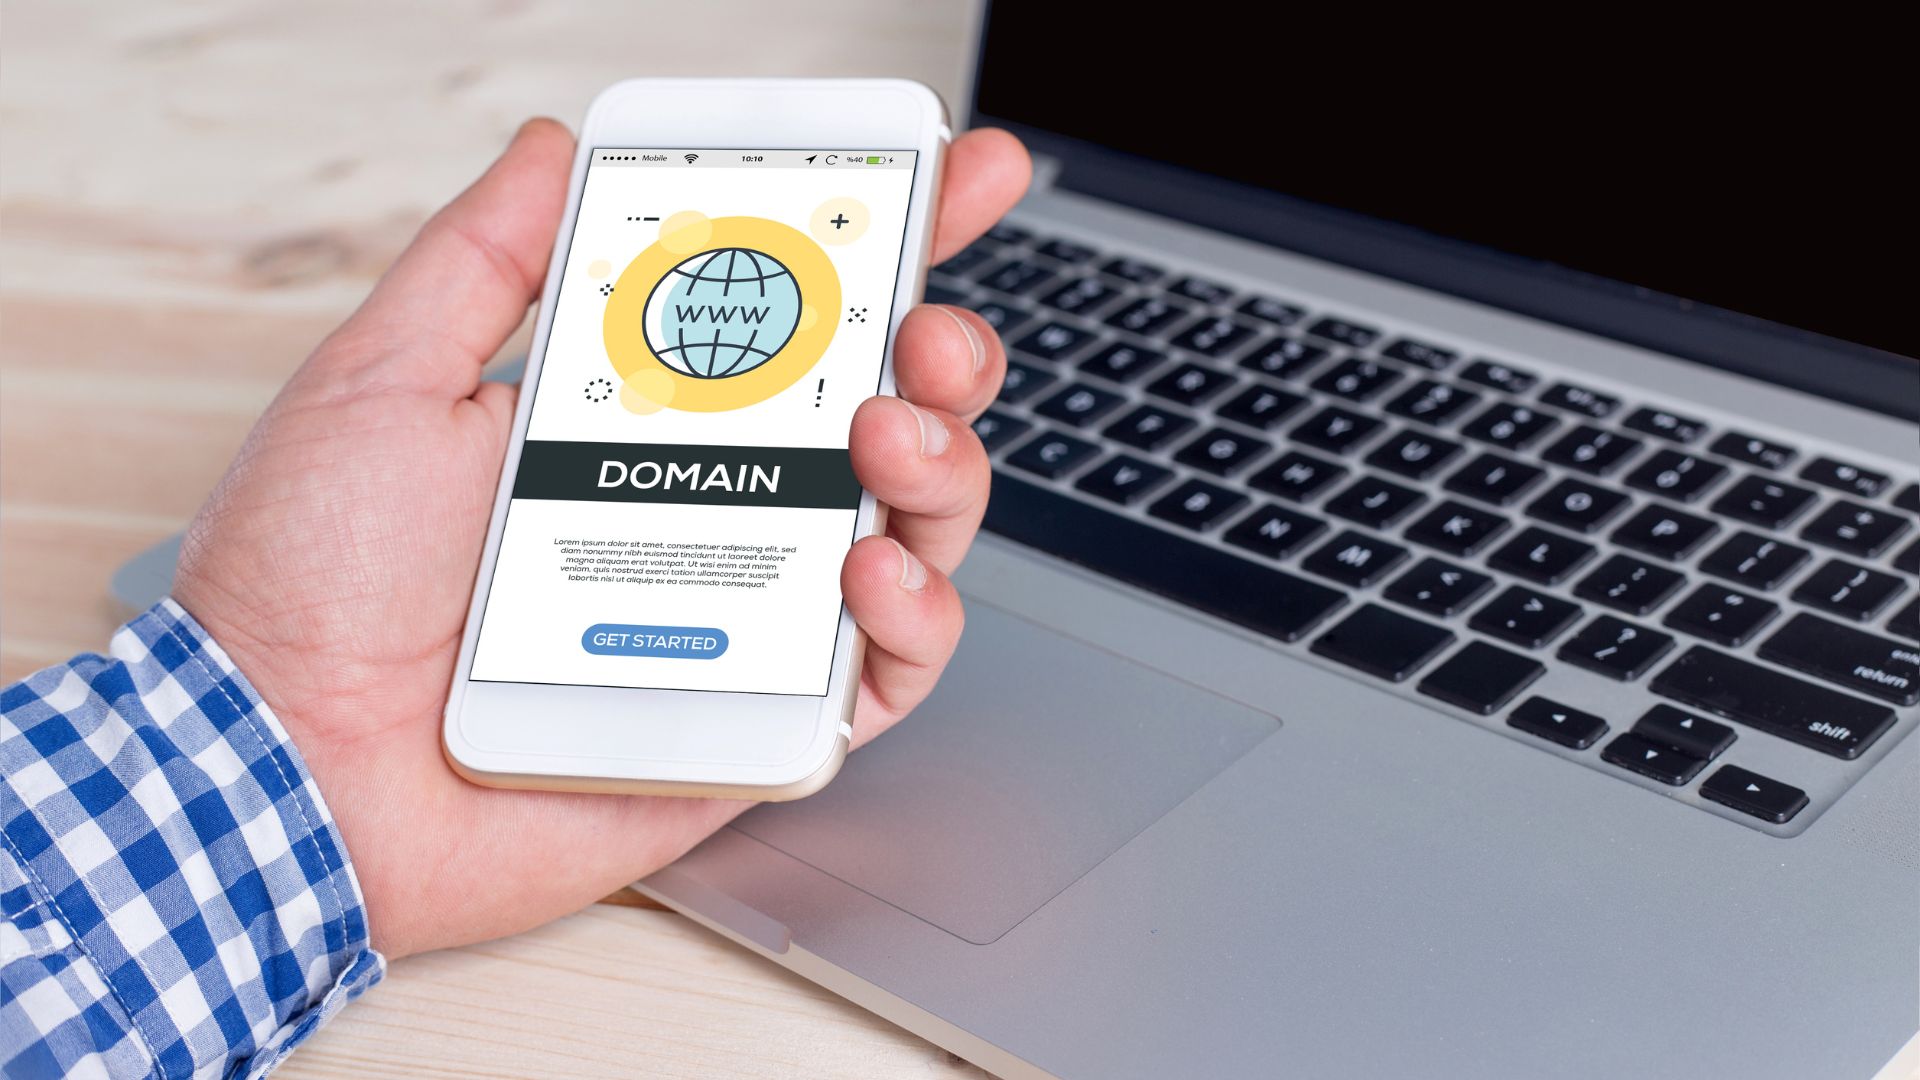 Marketing tactics for selling domains on a marketplace website